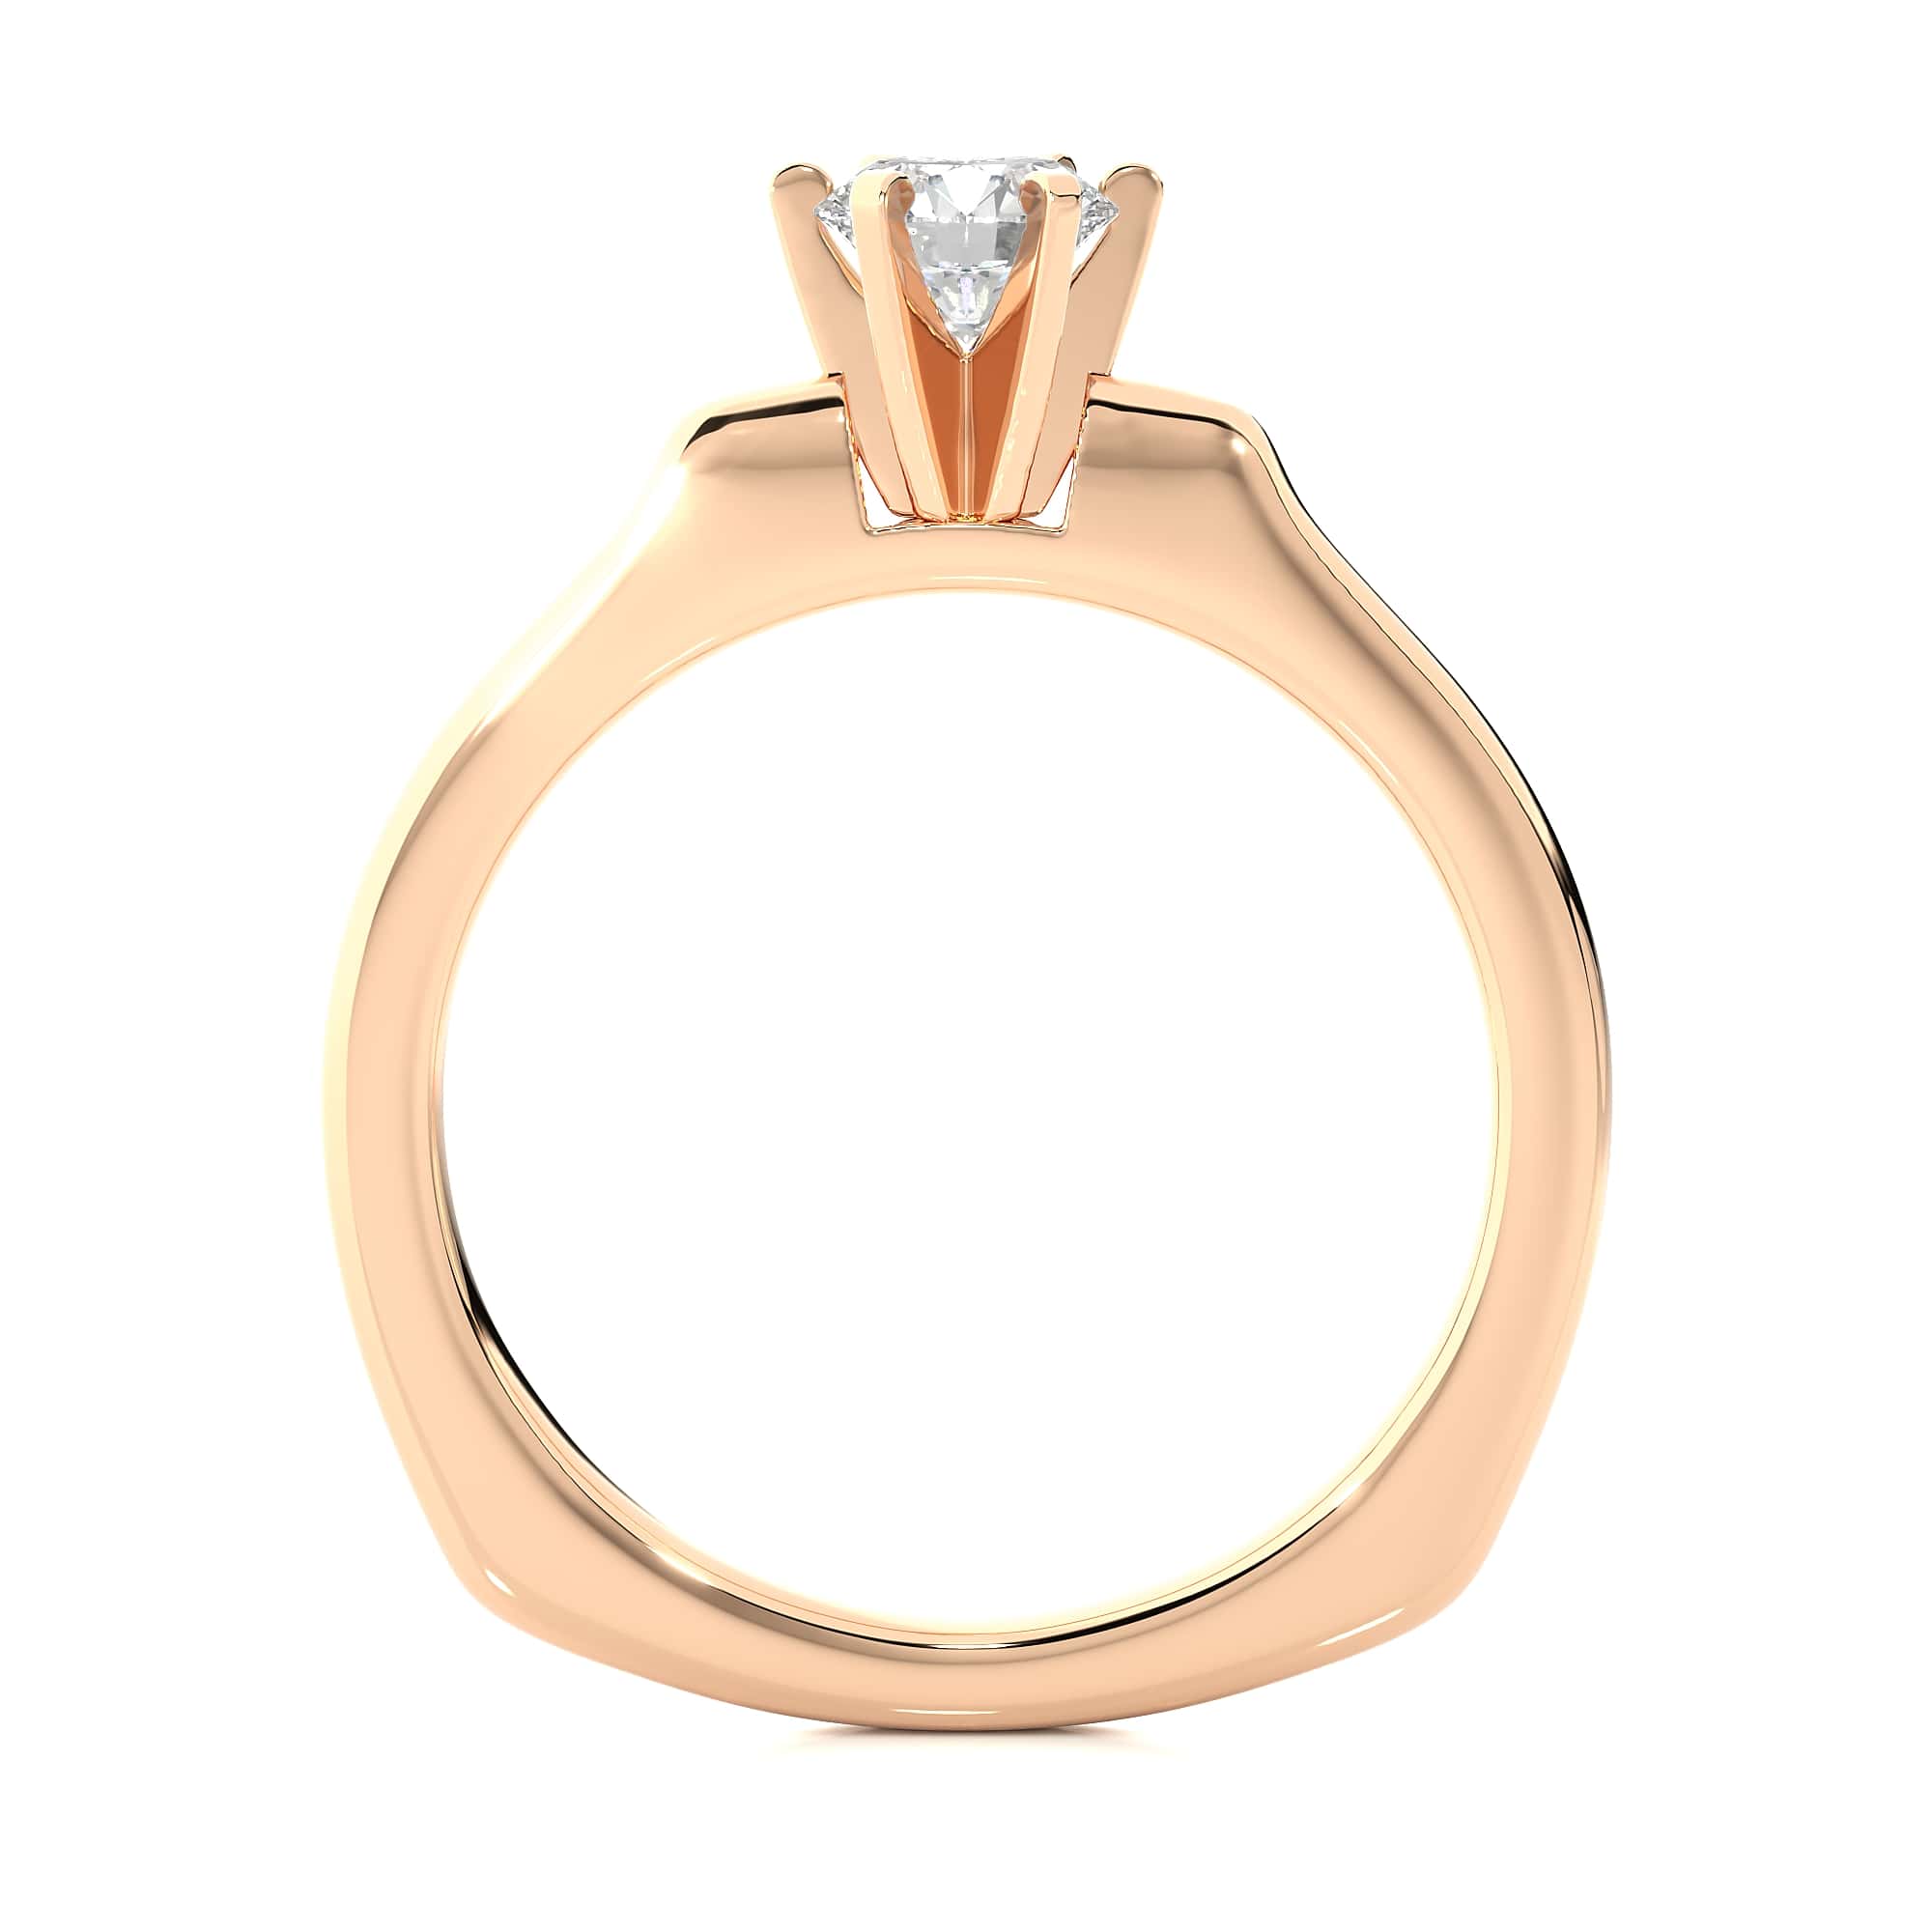 Fancy Solitaire Ring RG